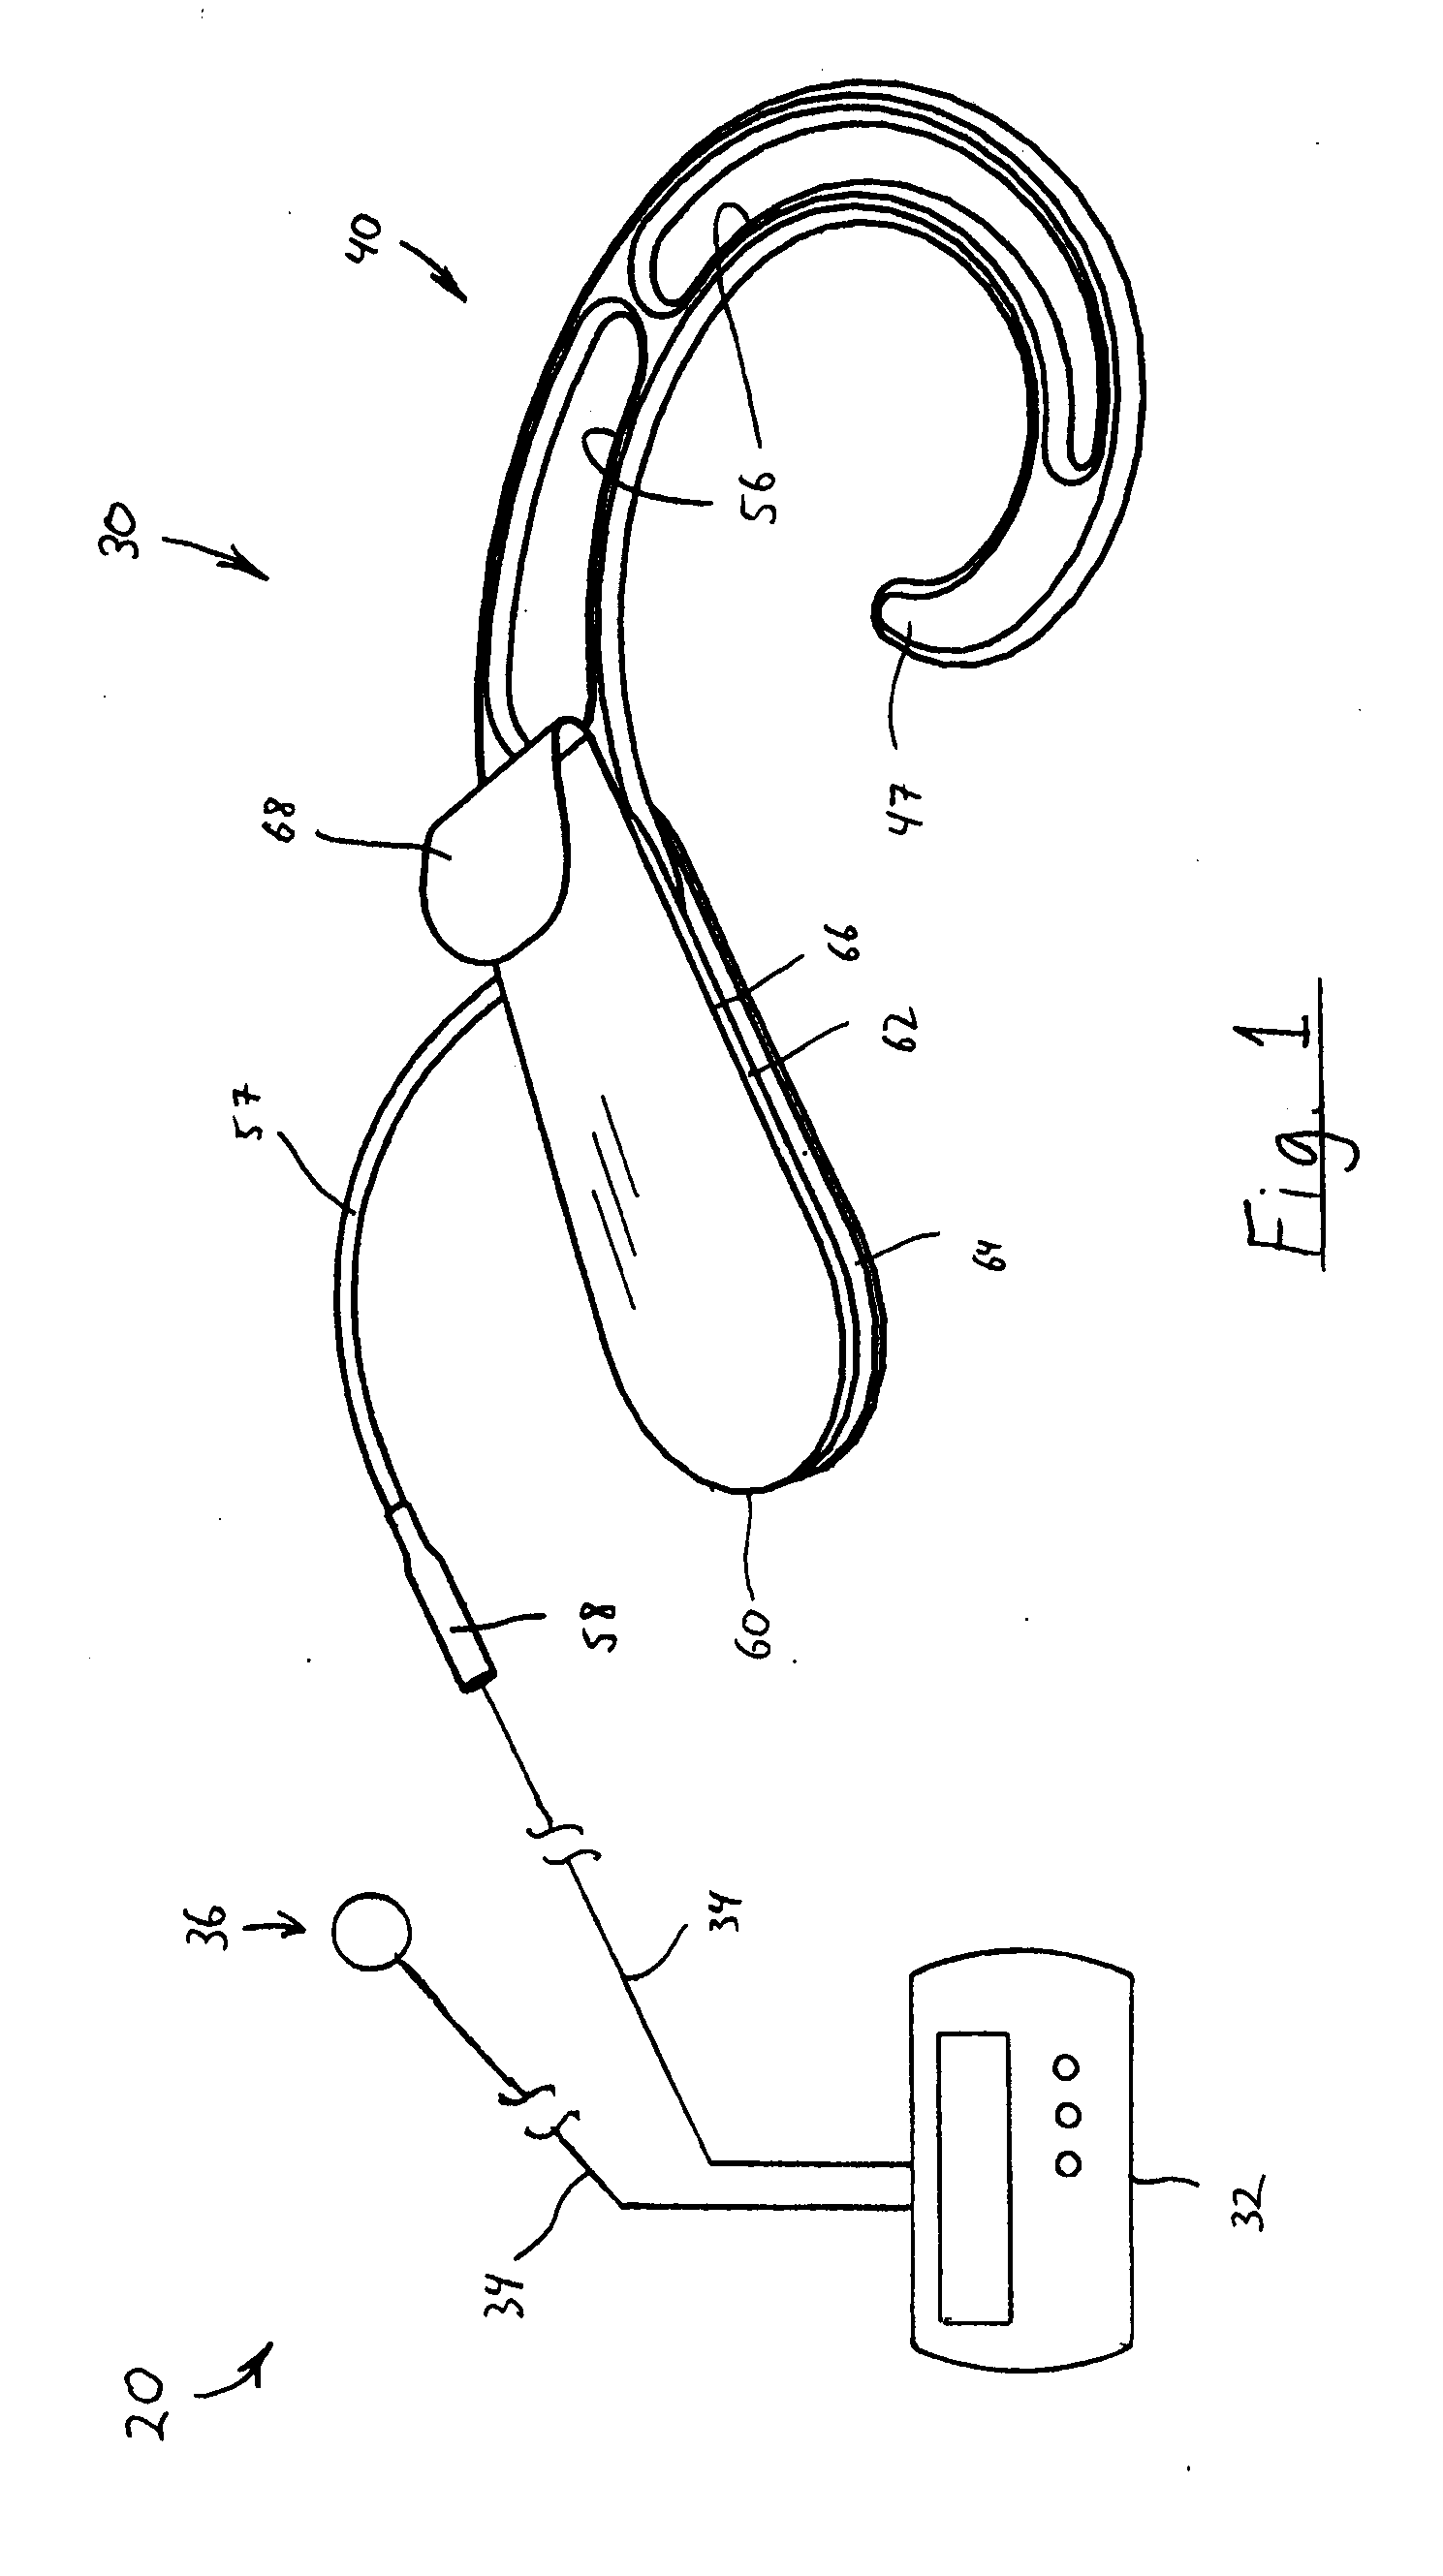 Electrode Assembly and Method of Using Same